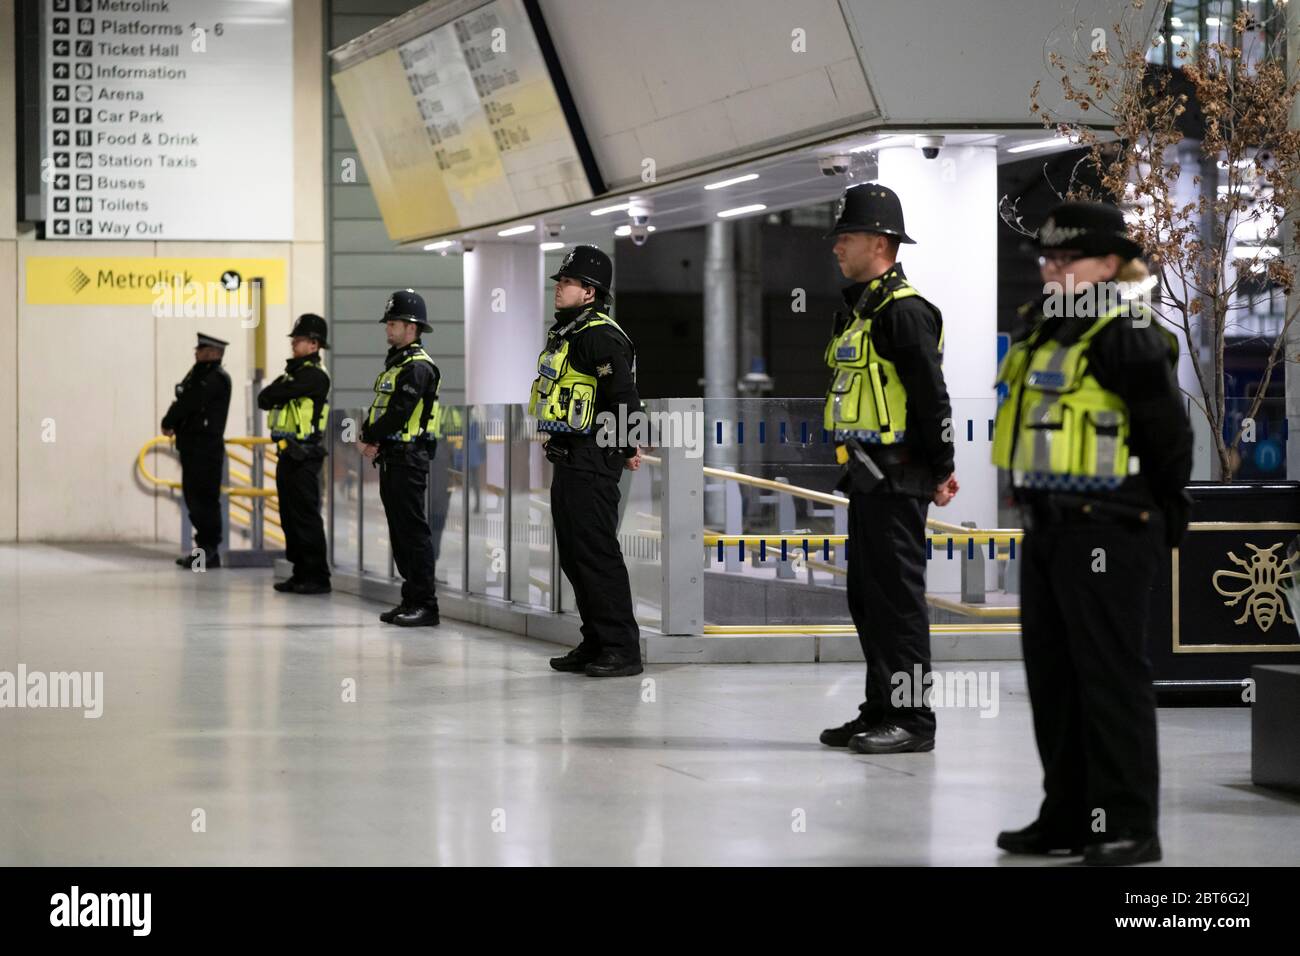 Manchester, UK. 22nd May, 2020. Police officers stand in line at Manchester Victoria Railway Station as the Manchester Arena BombÕs 3rd Anniversary is marked with a minuteÕs silence, Manchester, UK. Credit: Jon Super/Alamy Live News. Stock Photo